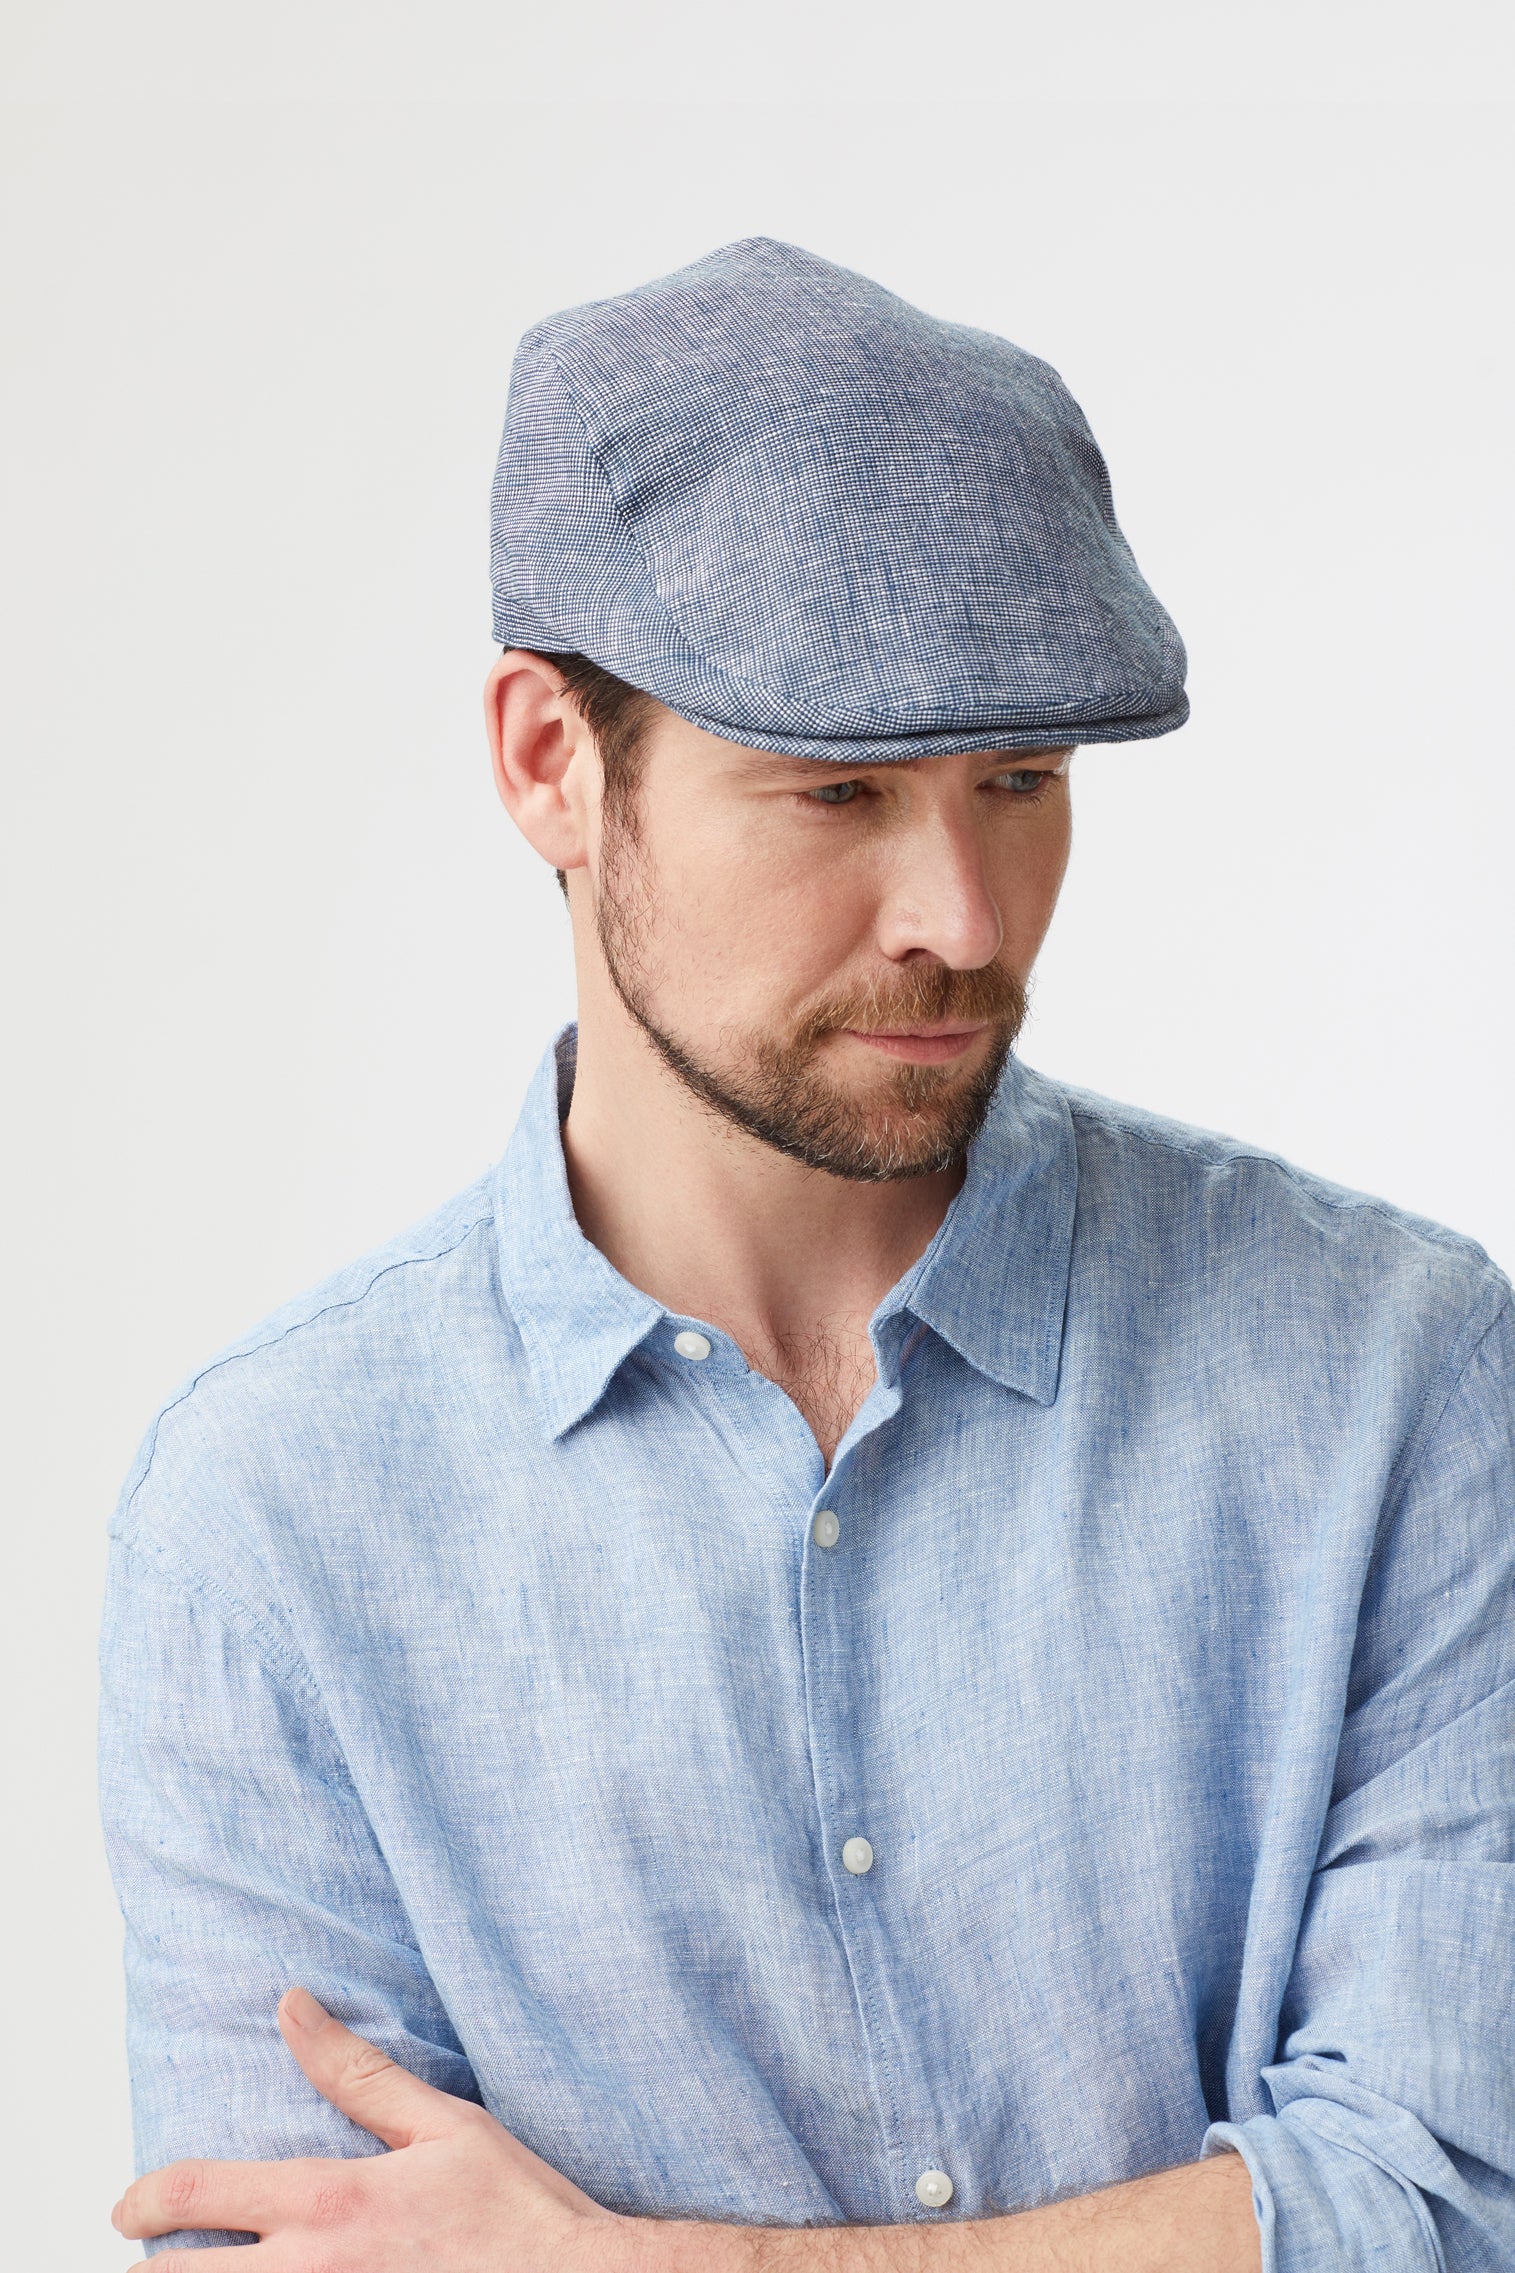 Summer Grosvenor Blue Flat Cap - Father's Day Gift Guide - Lock & Co. Hatters London UK